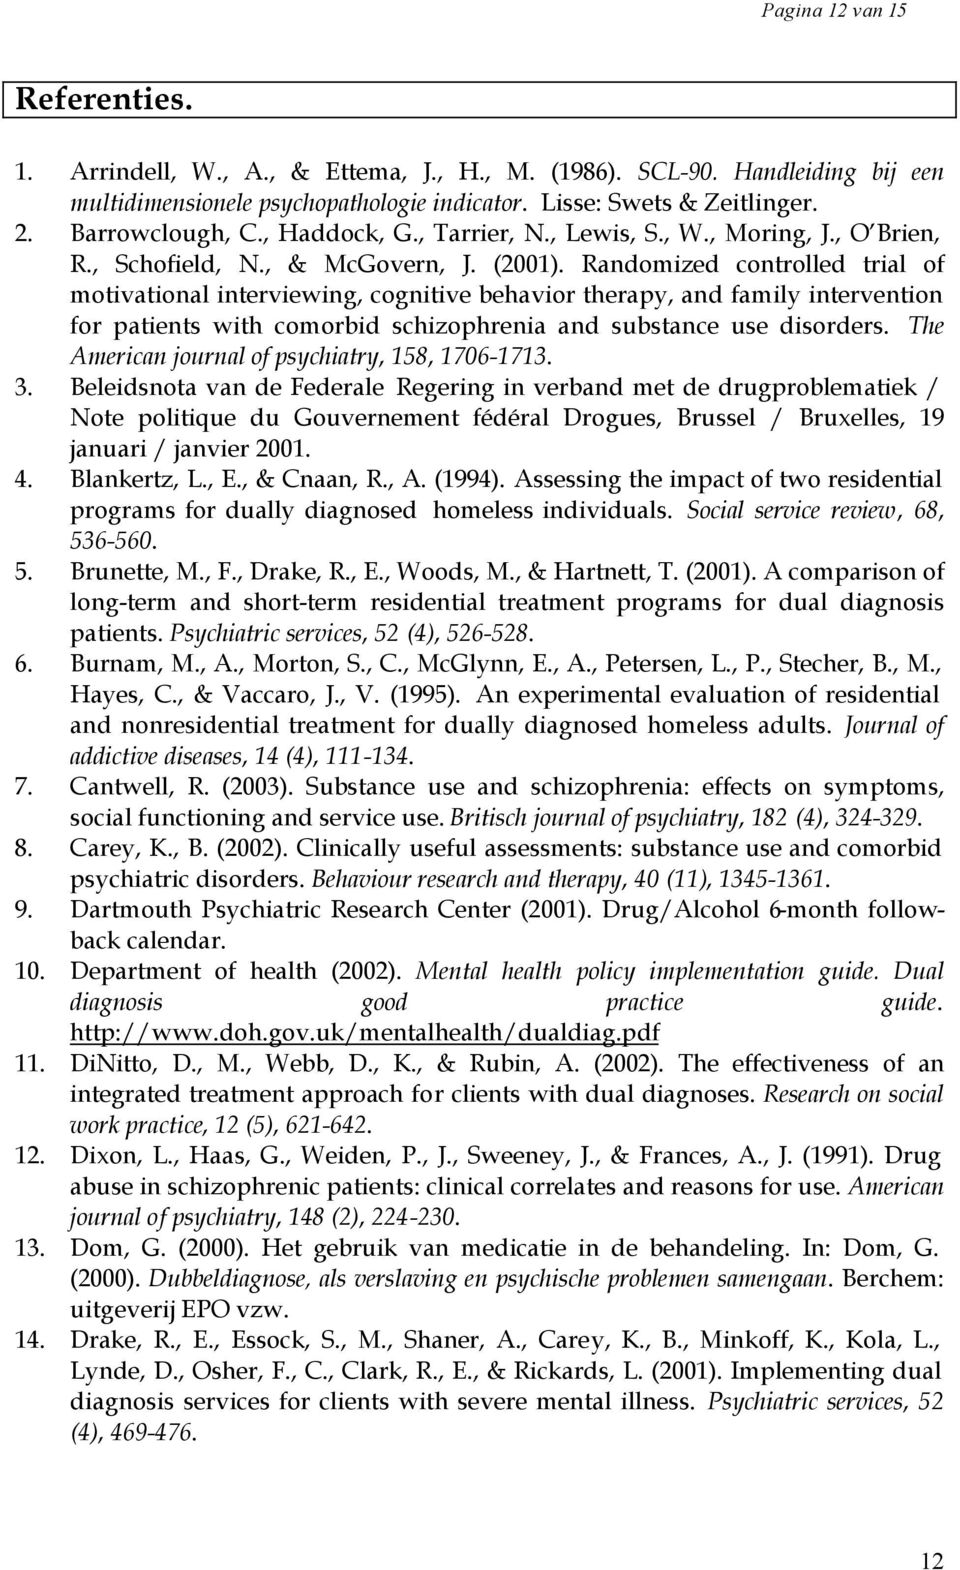 Randomized controlled trial of motivational interviewing, cognitive behavior therapy, and family intervention for patients with comorbid schizophrenia and substance use disorders.